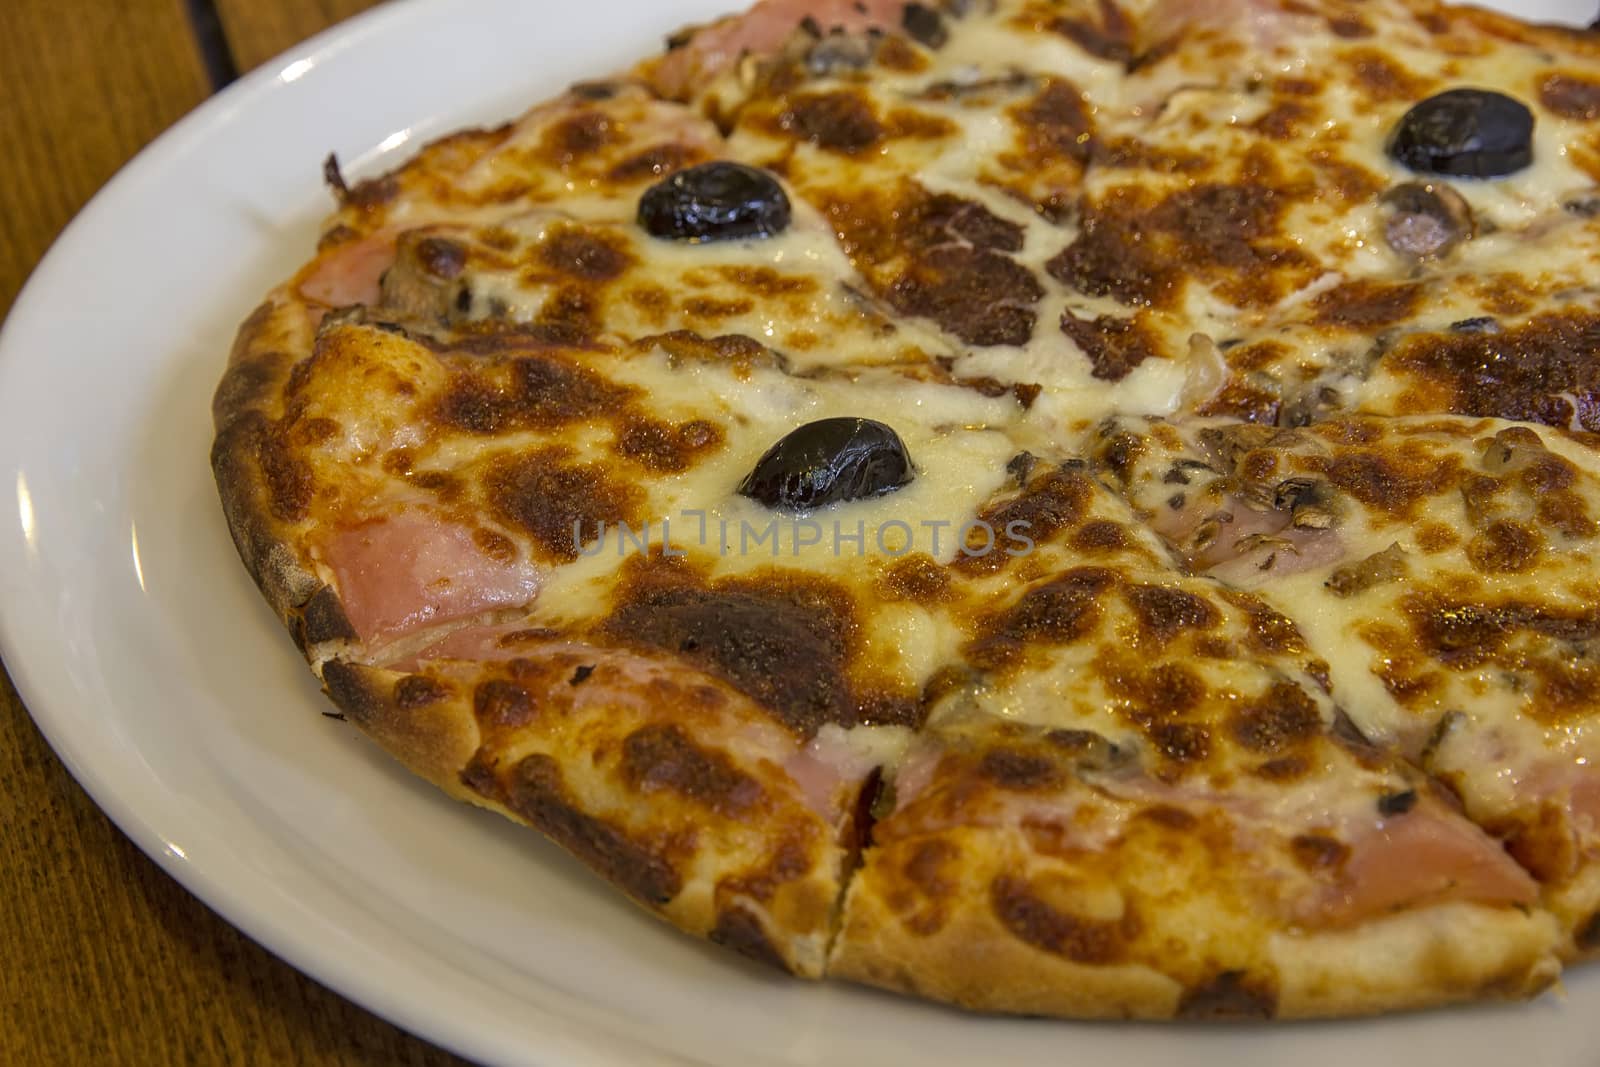 tasty pizza with mushrooms, cheese, olives and meat on the plate